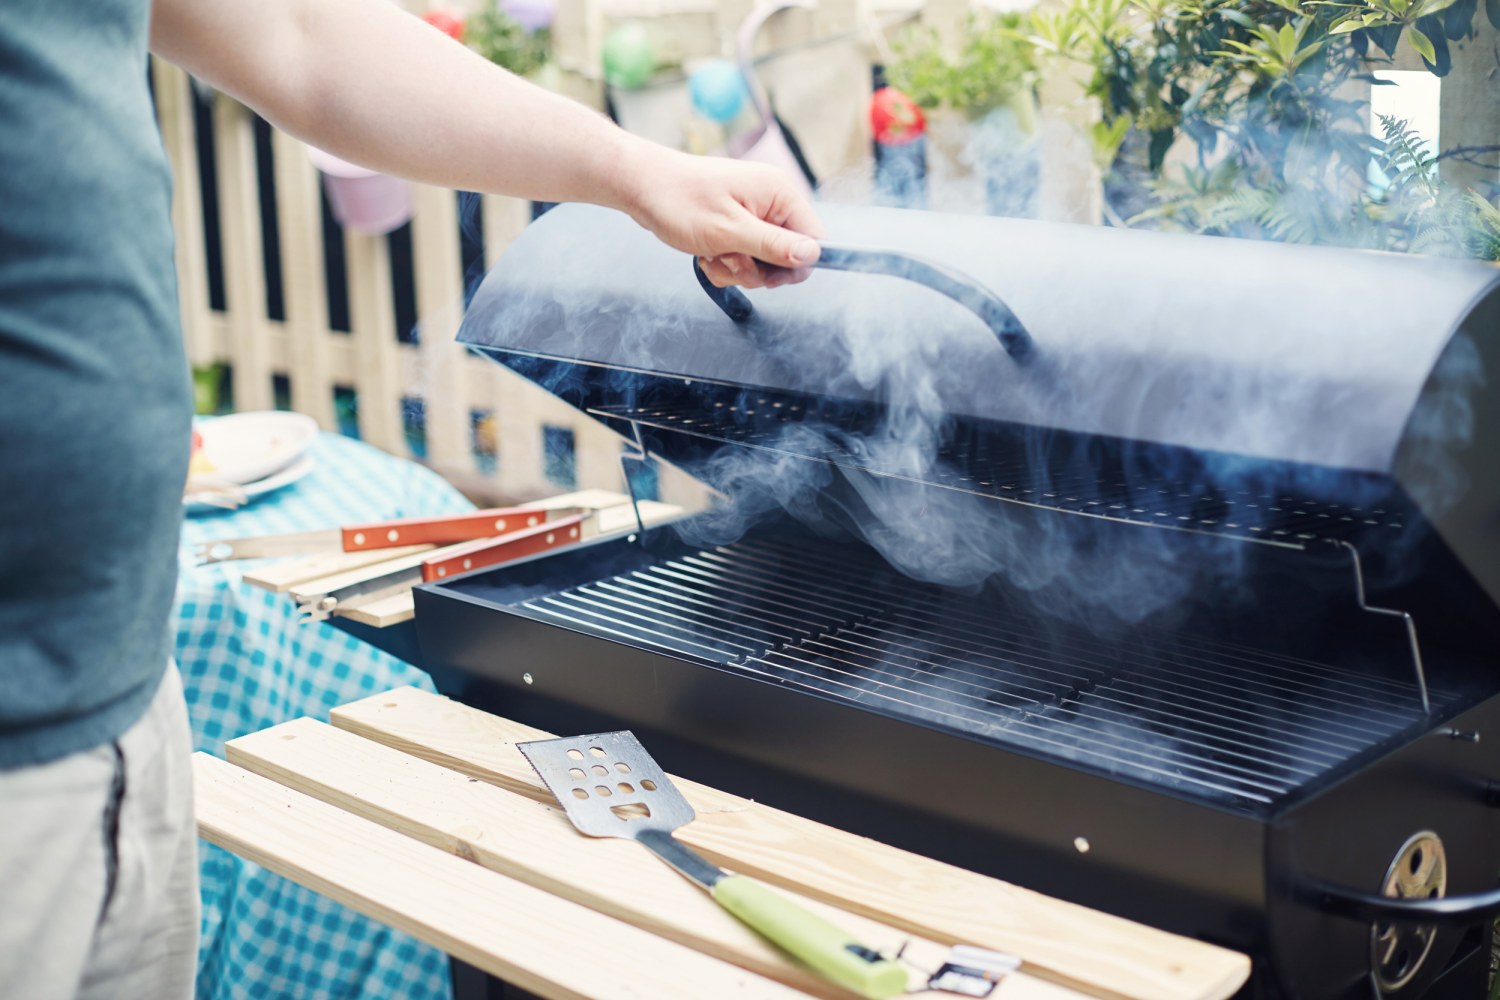 Start Your Summer With a Gas Grill Upgrade